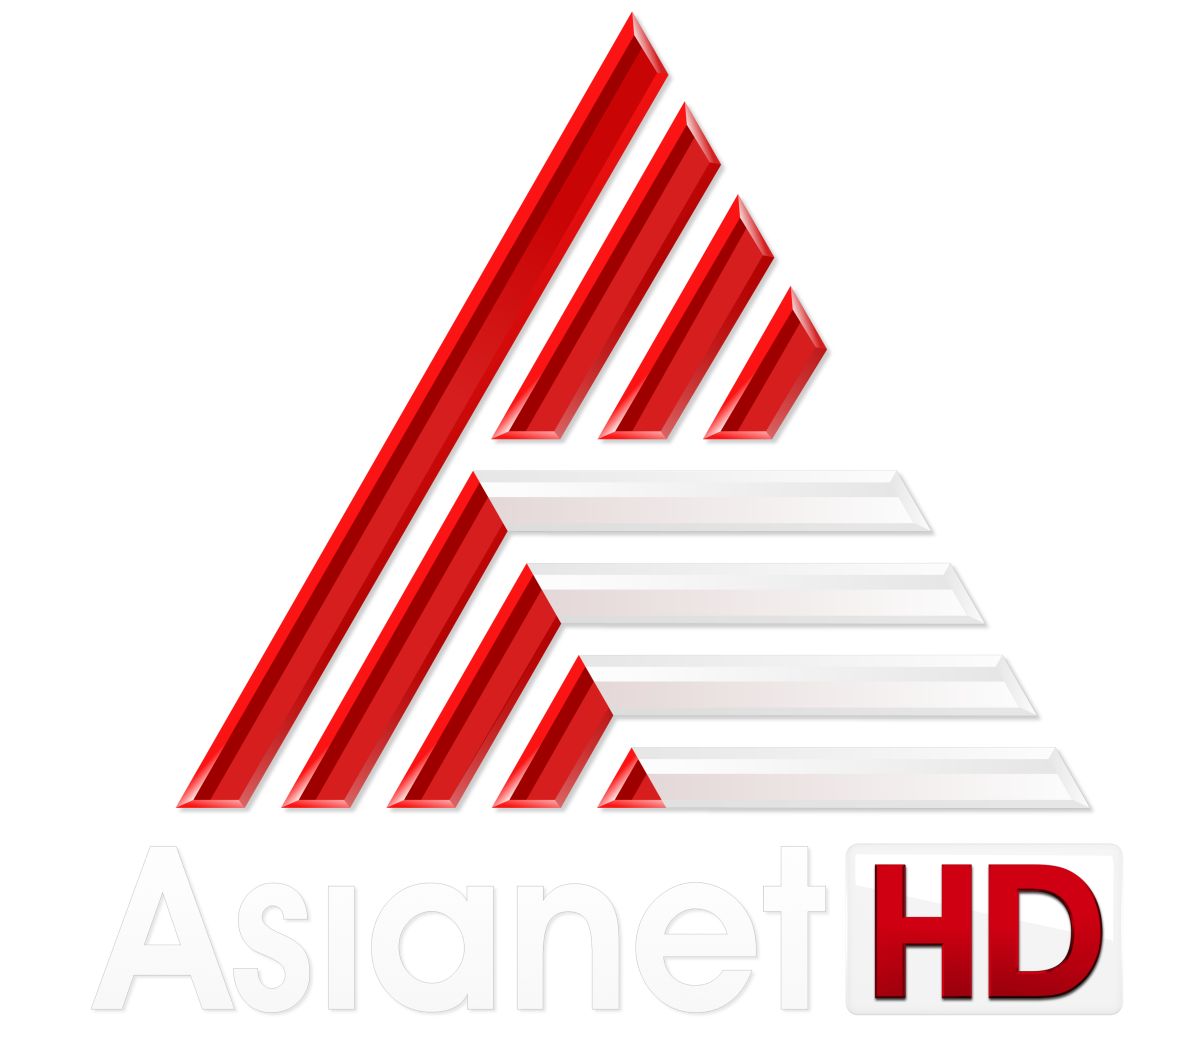 Asianet HD Schedule Today - Complete Program Telecast Time of Malayalam Serials, Reality Shows, Comedy Shows 2